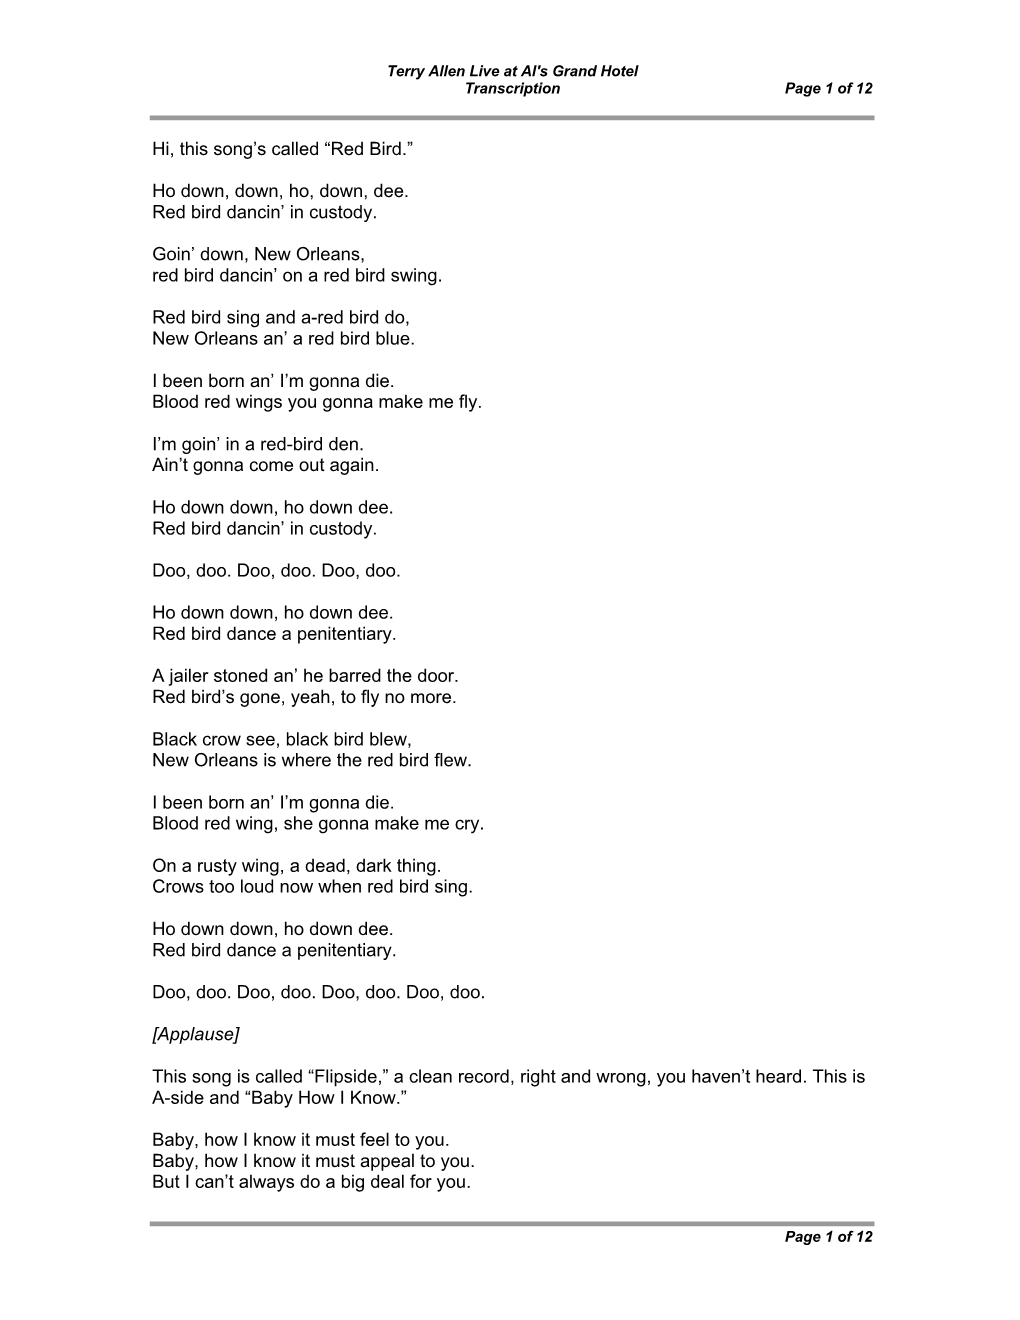 Terry Allen Live at Al's Grand Hotel Transcription Page 1 of 12 Page 1 of 12